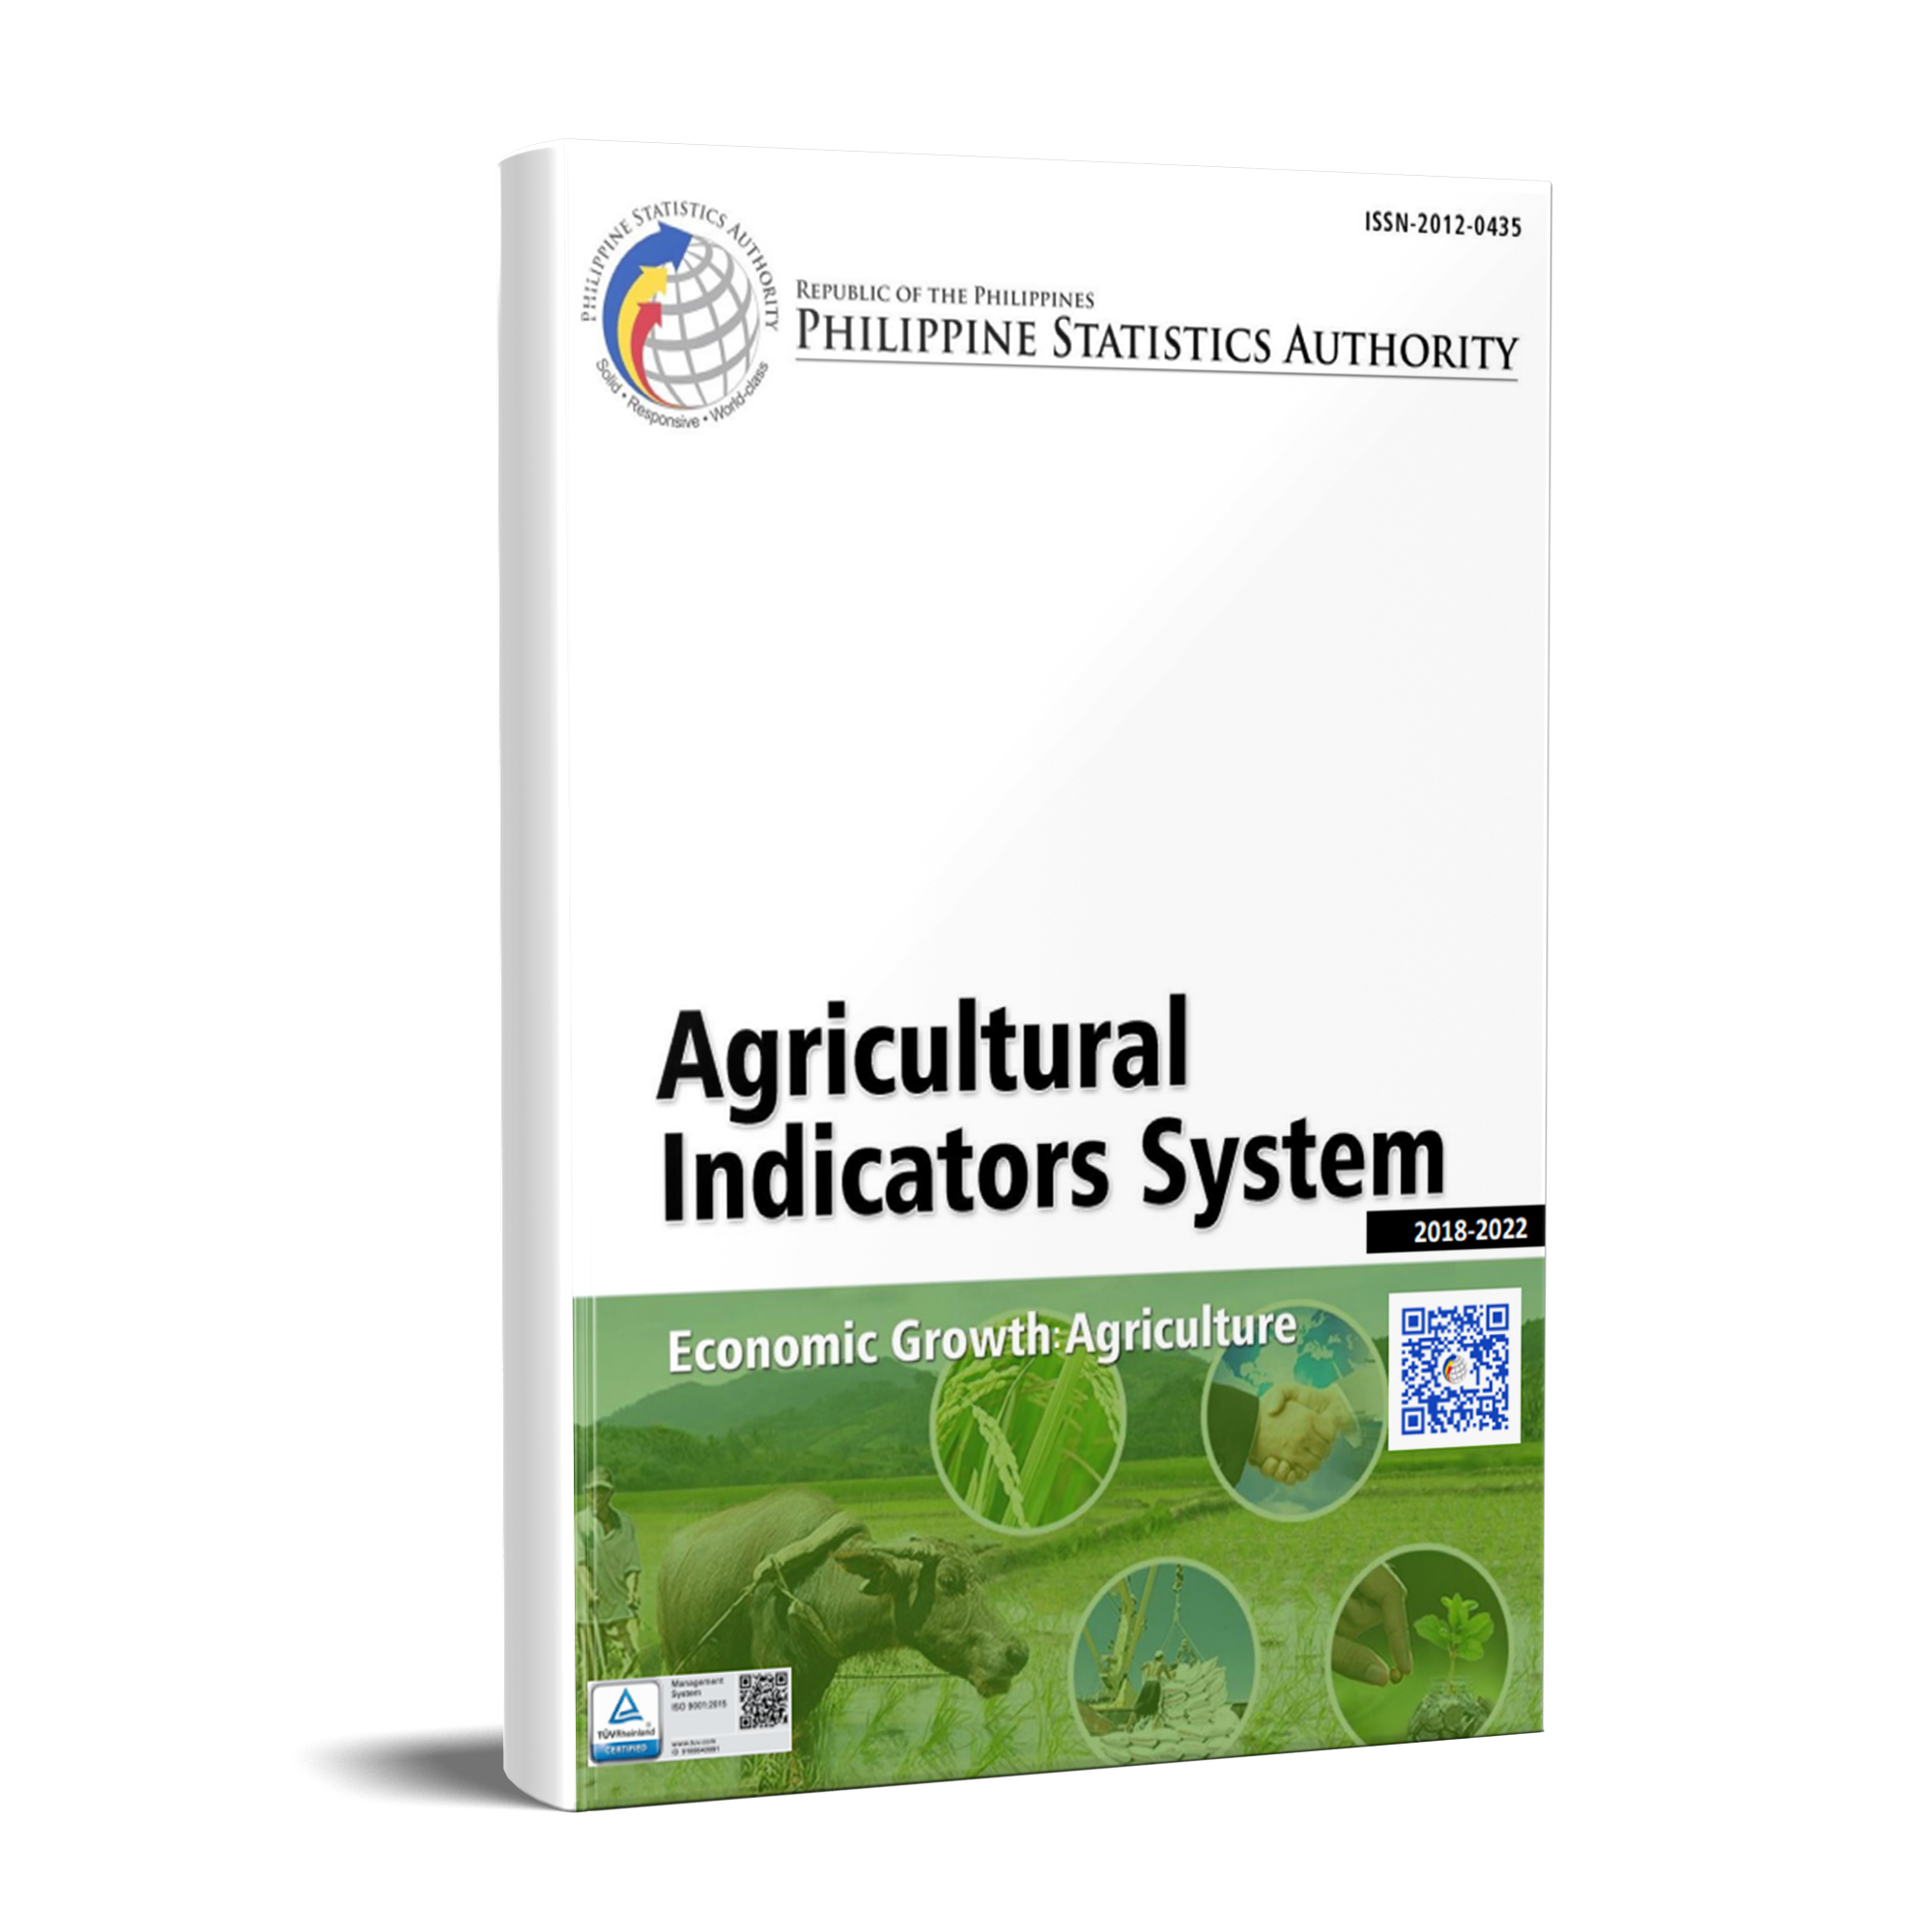 Agricultural Indicators System: Economic Growth (Agriculture)